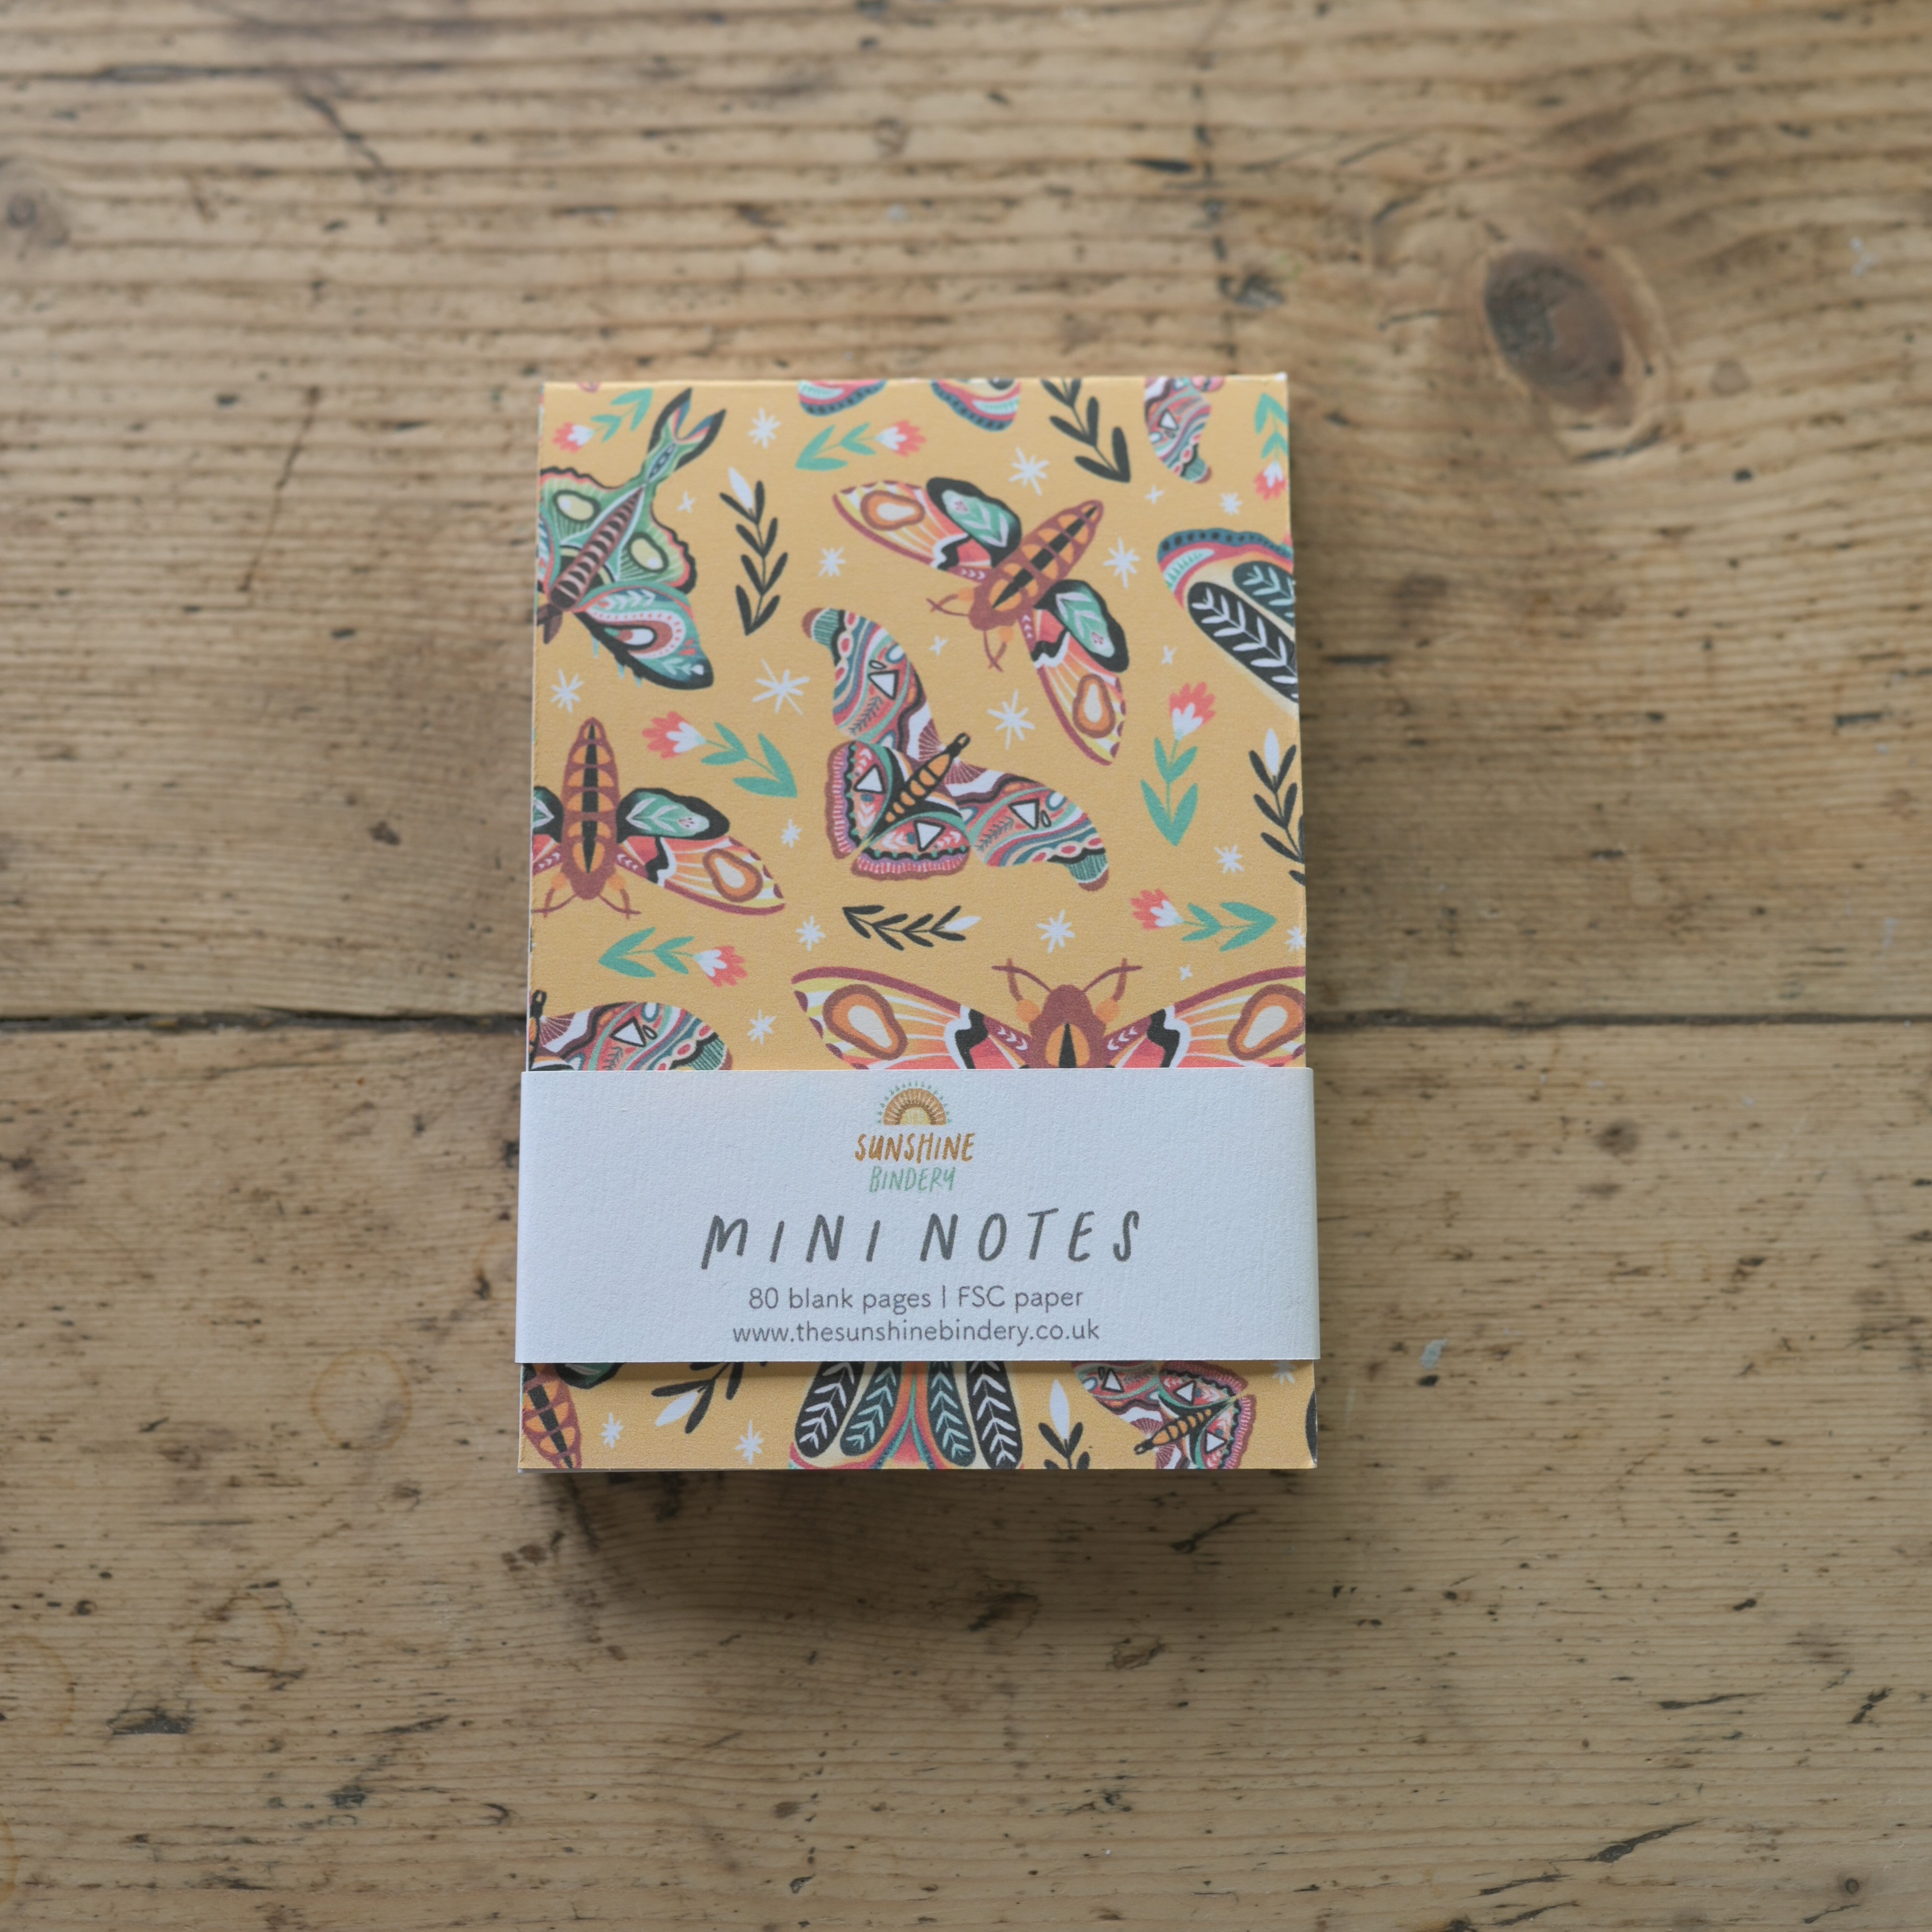 Mini Notes, By The Sunshine Bindery